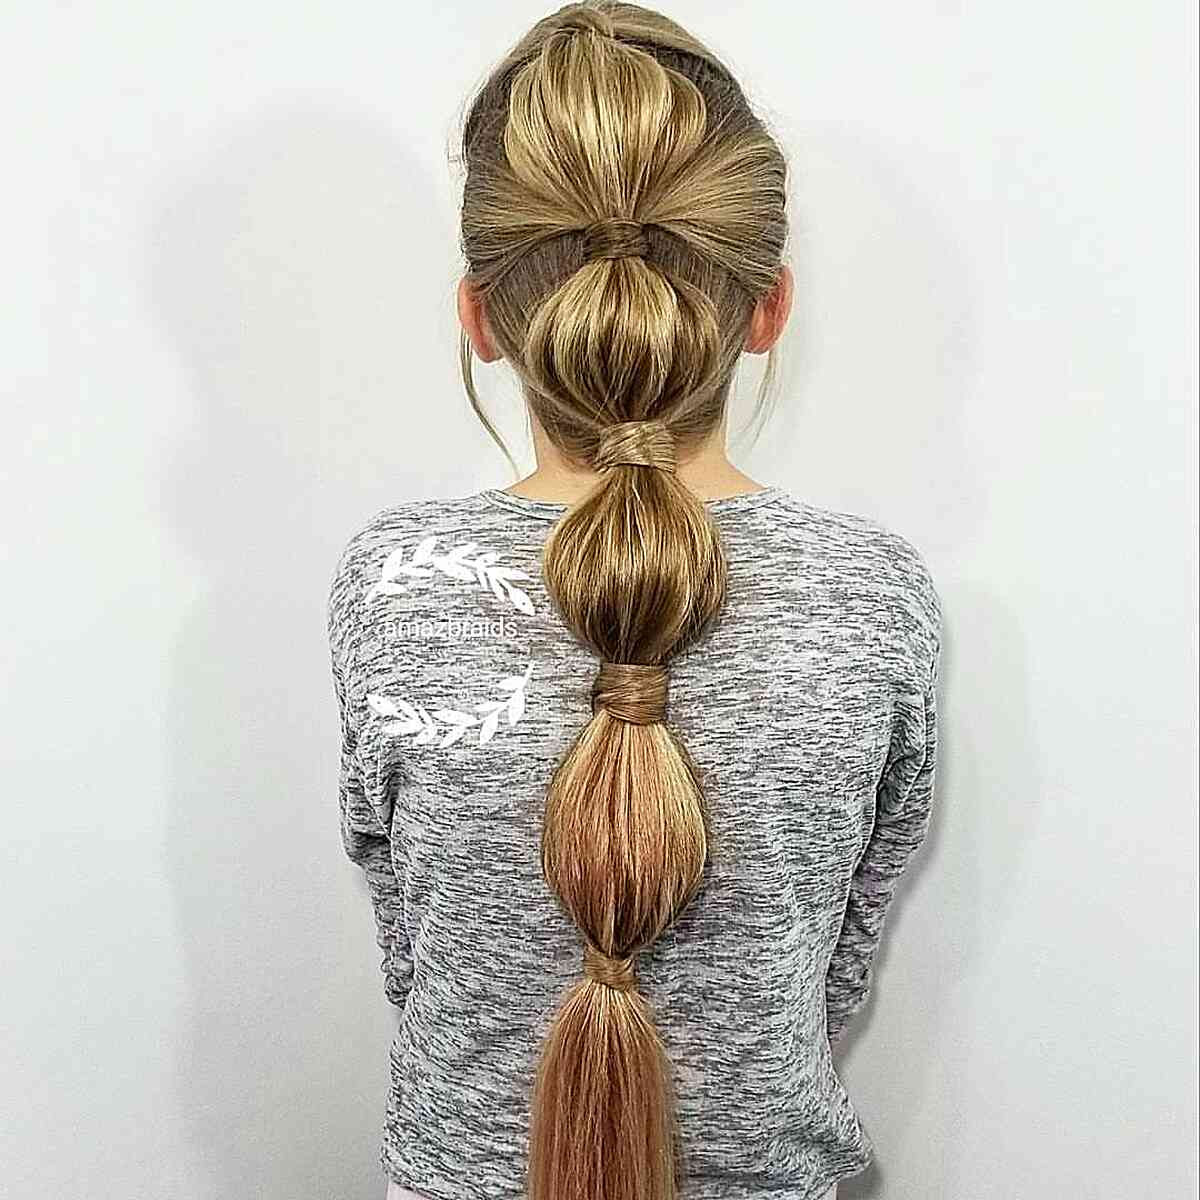 Loose Bubble Braid Hairstyle for Young Girls who Play Softball